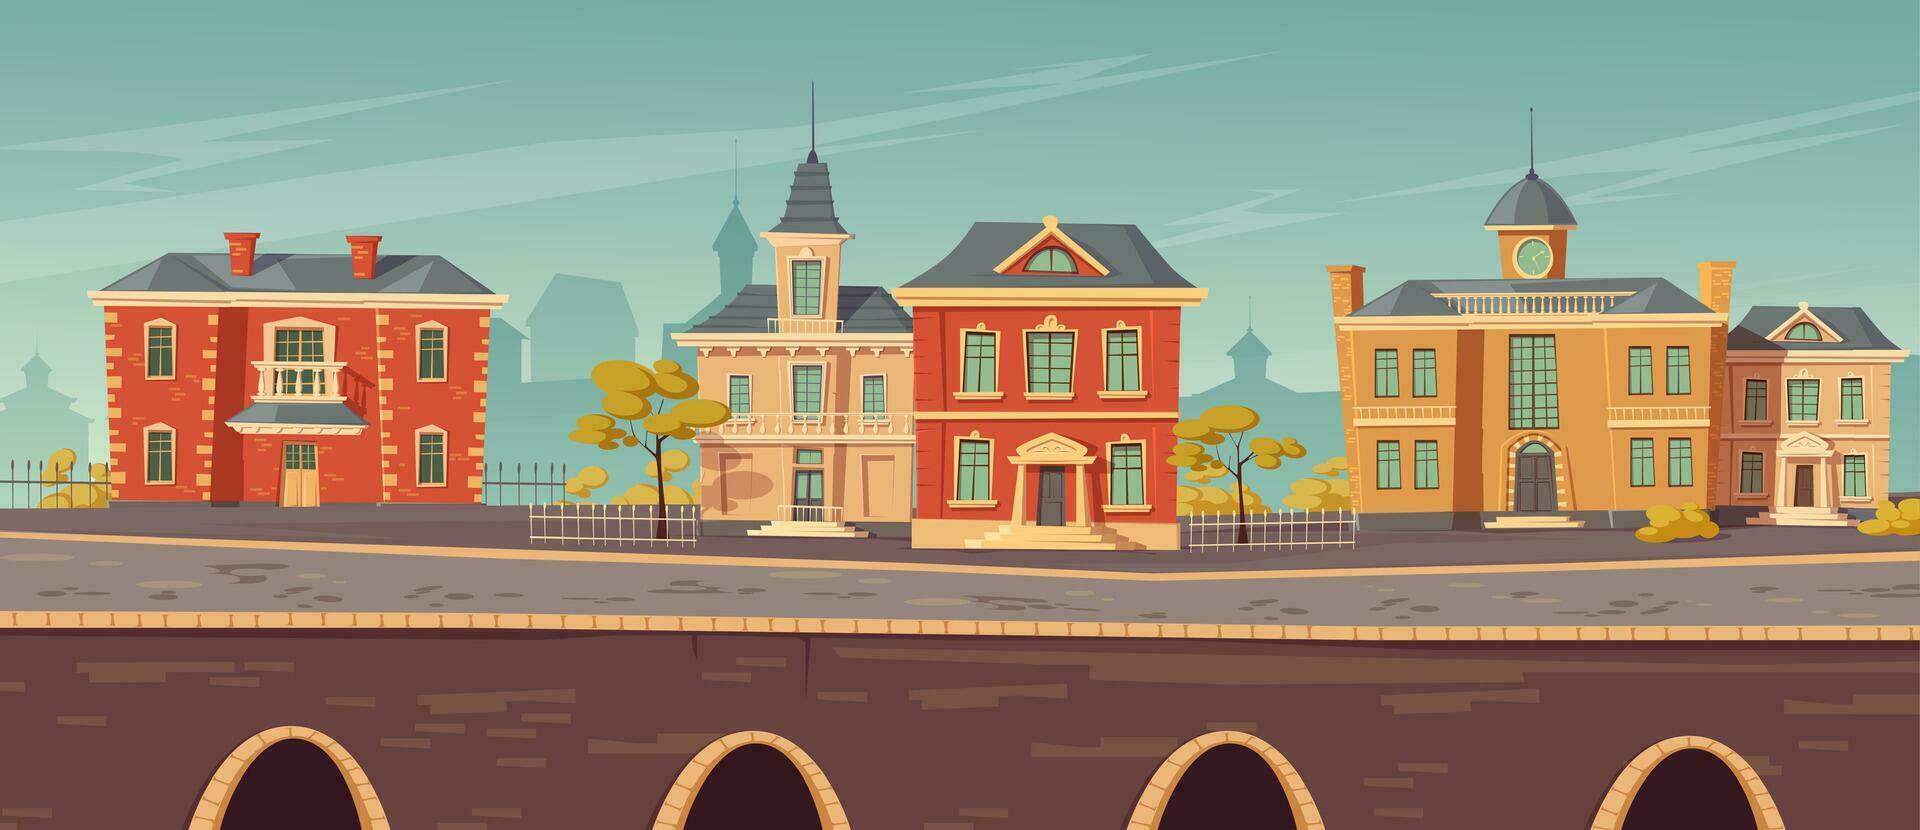 19th century town street with european buildings vector